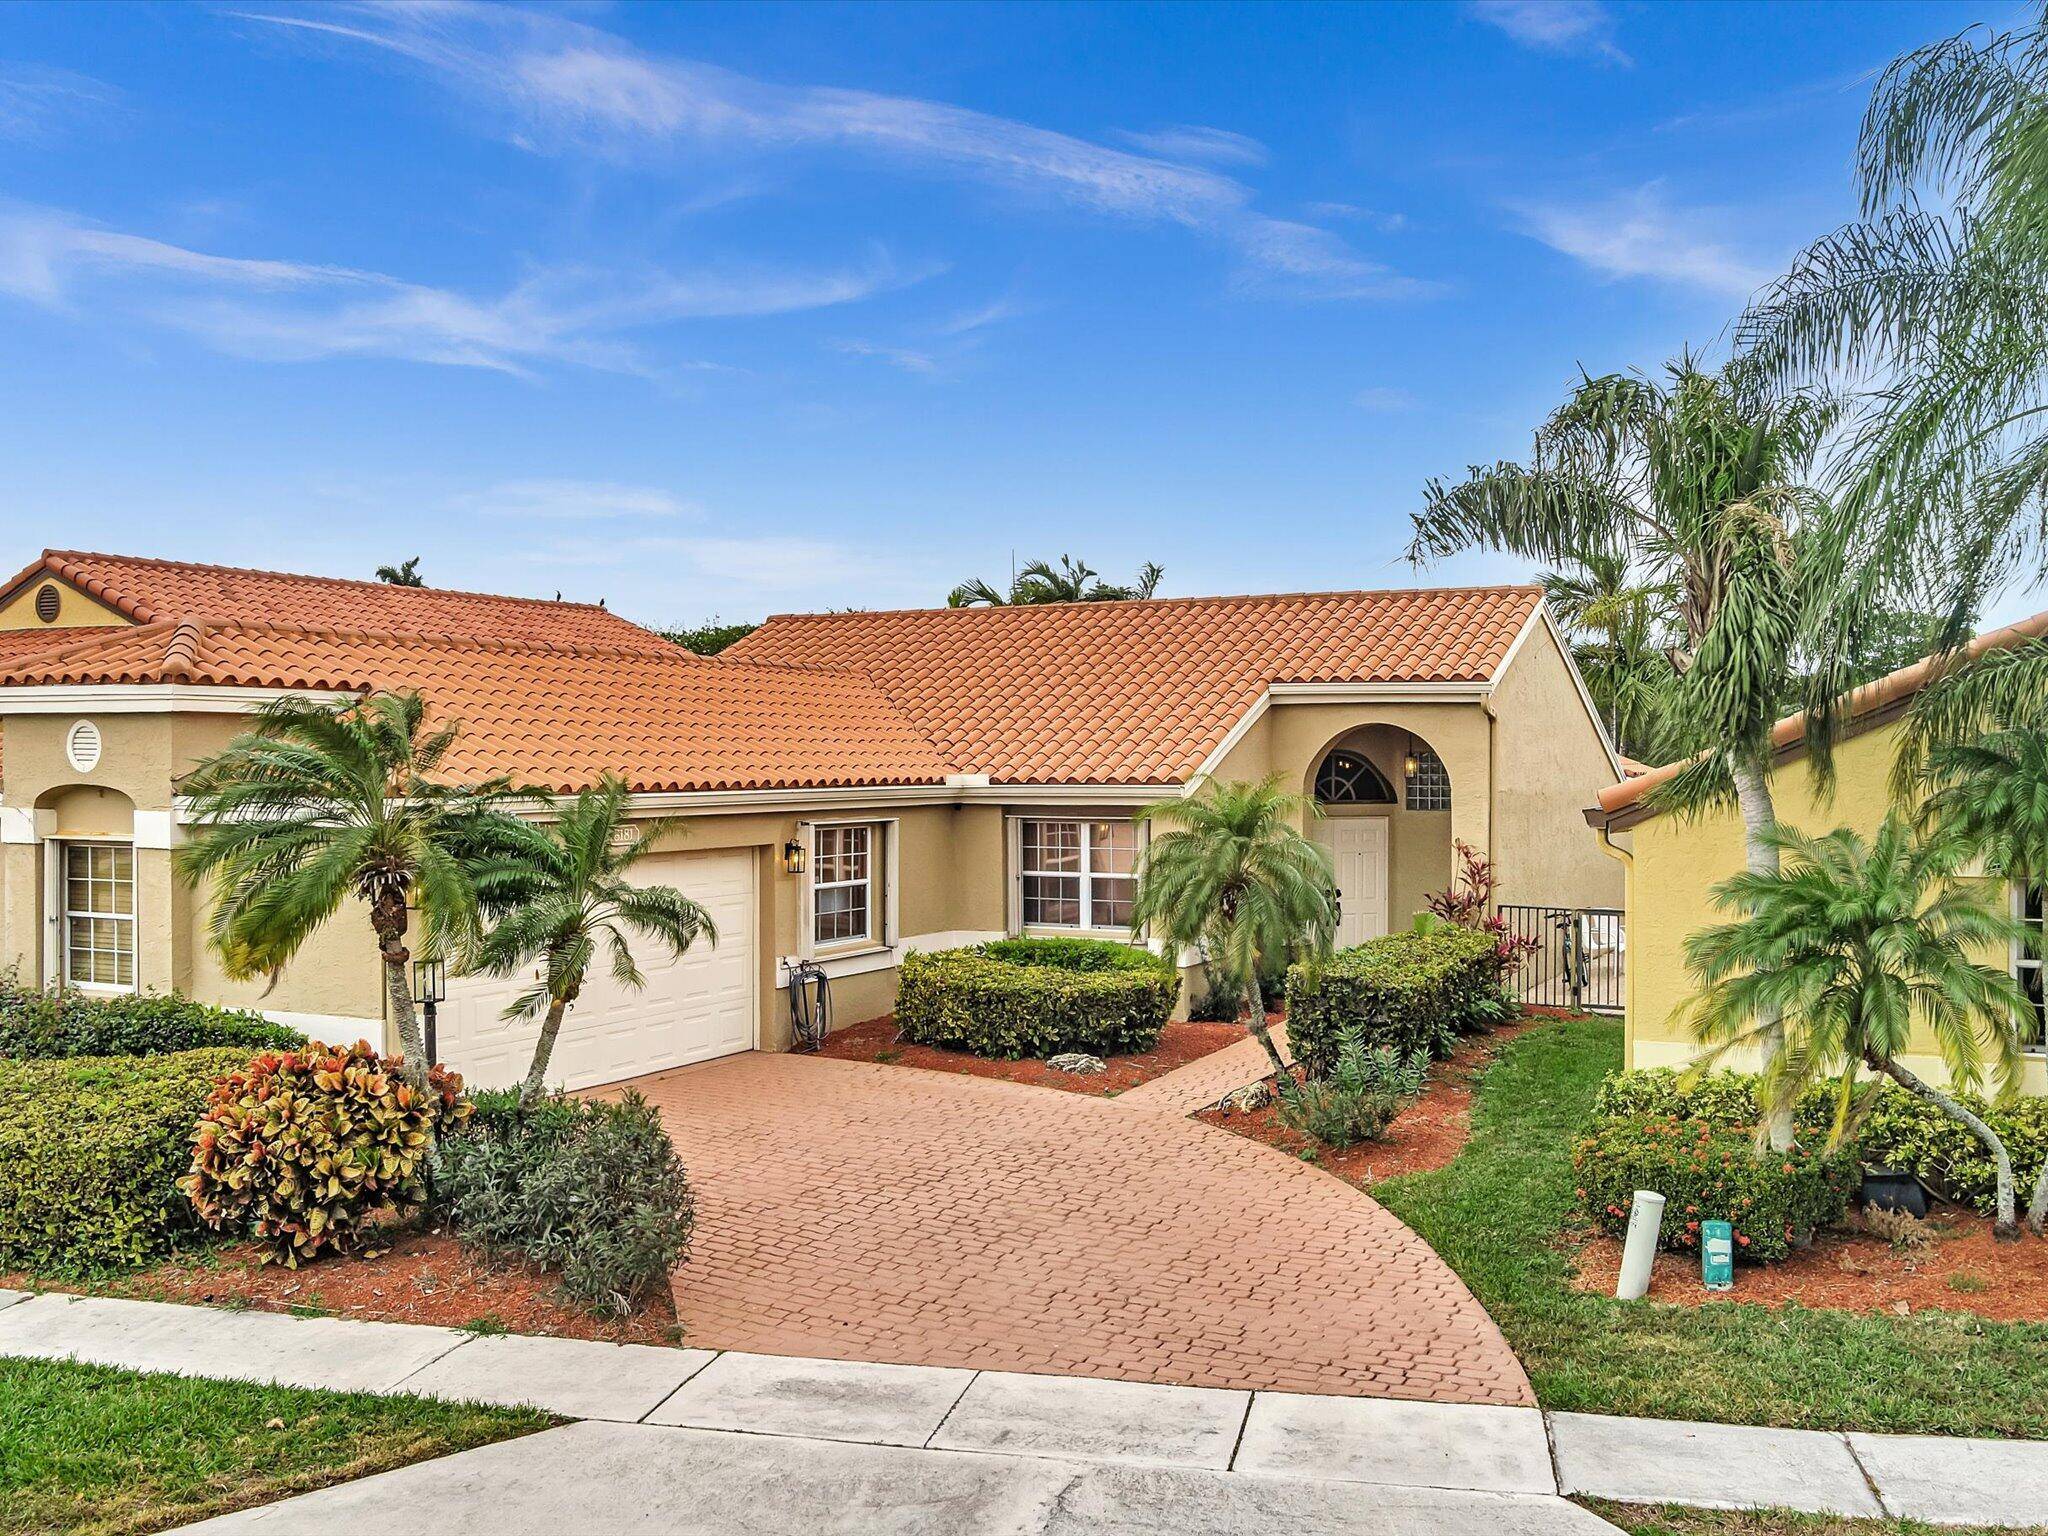 FULLY REMODELED FLOOR CEILING POOL HOUSE IN THE HEART OF BOCA WITH THE LAKE VIEW.